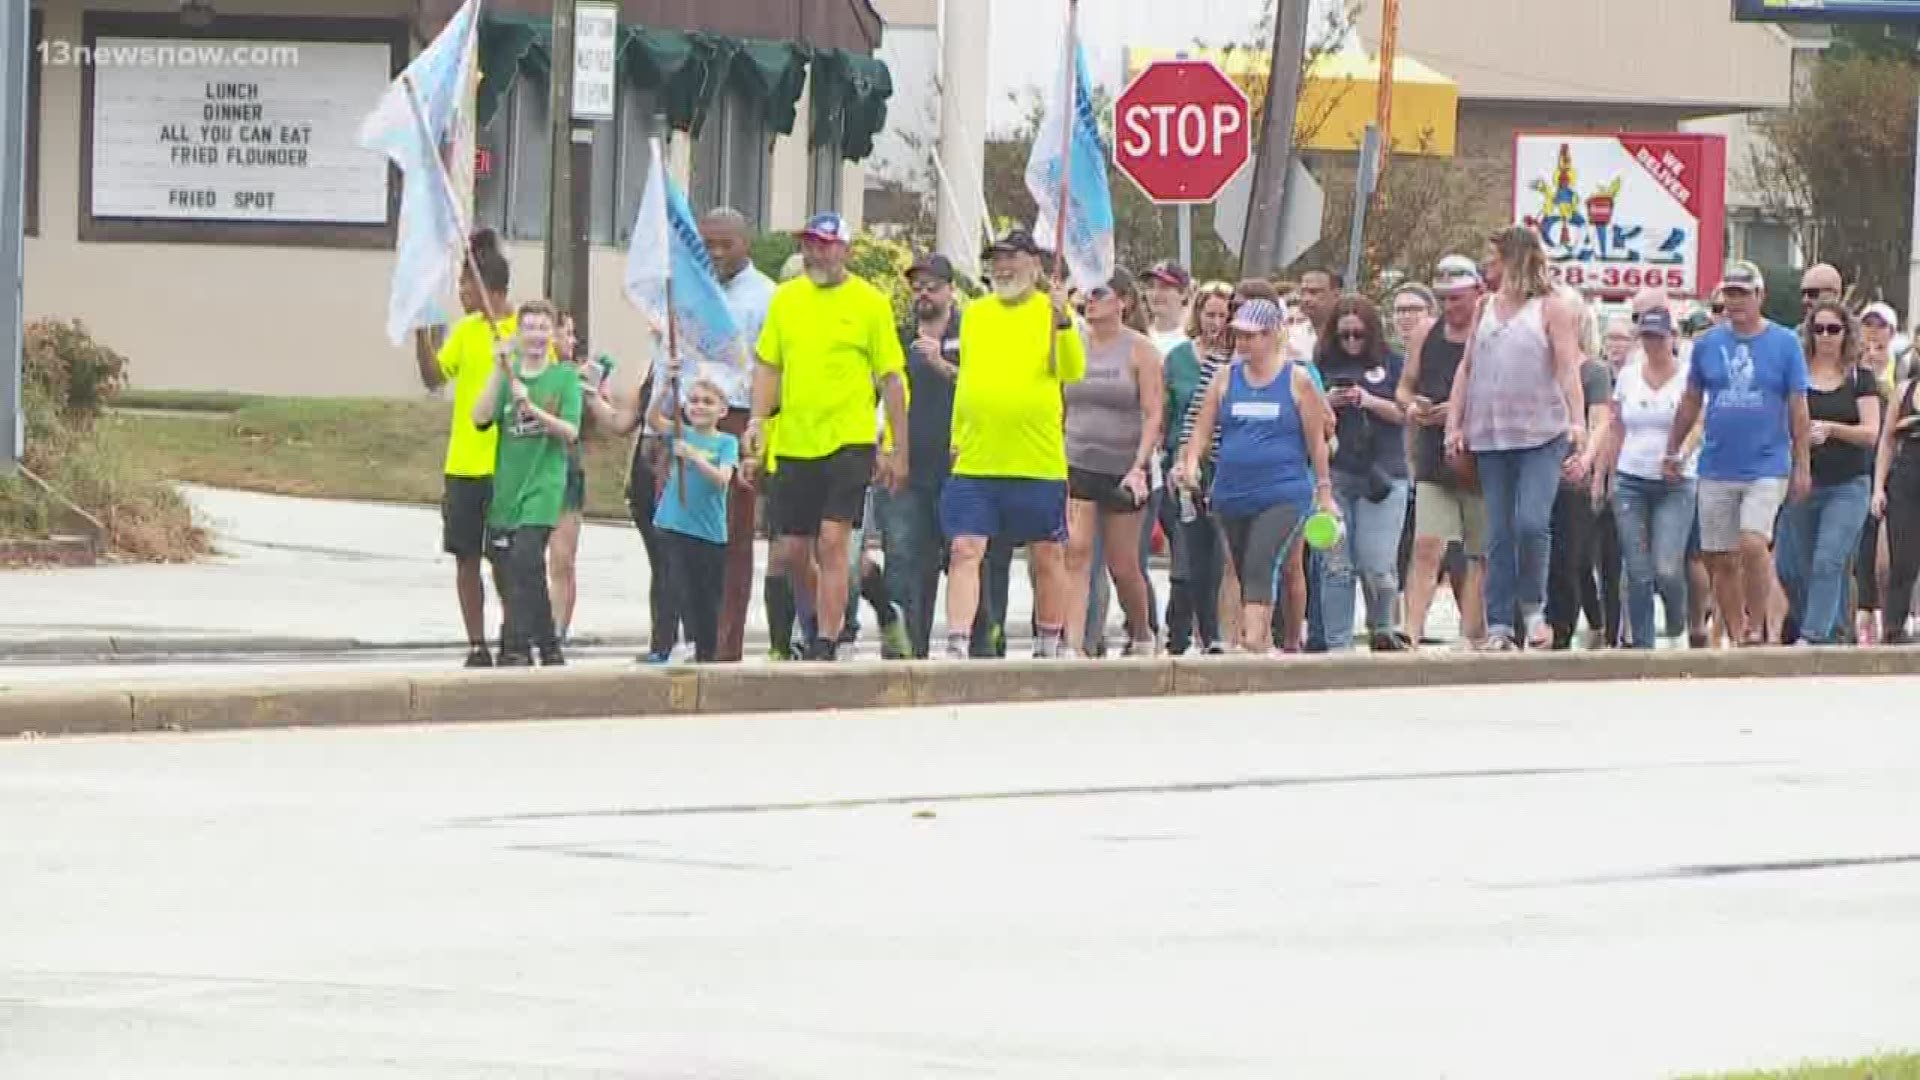 The crew walked across the country to raise money for the victims of the Virginia Beach Municipal Center mass shooting.